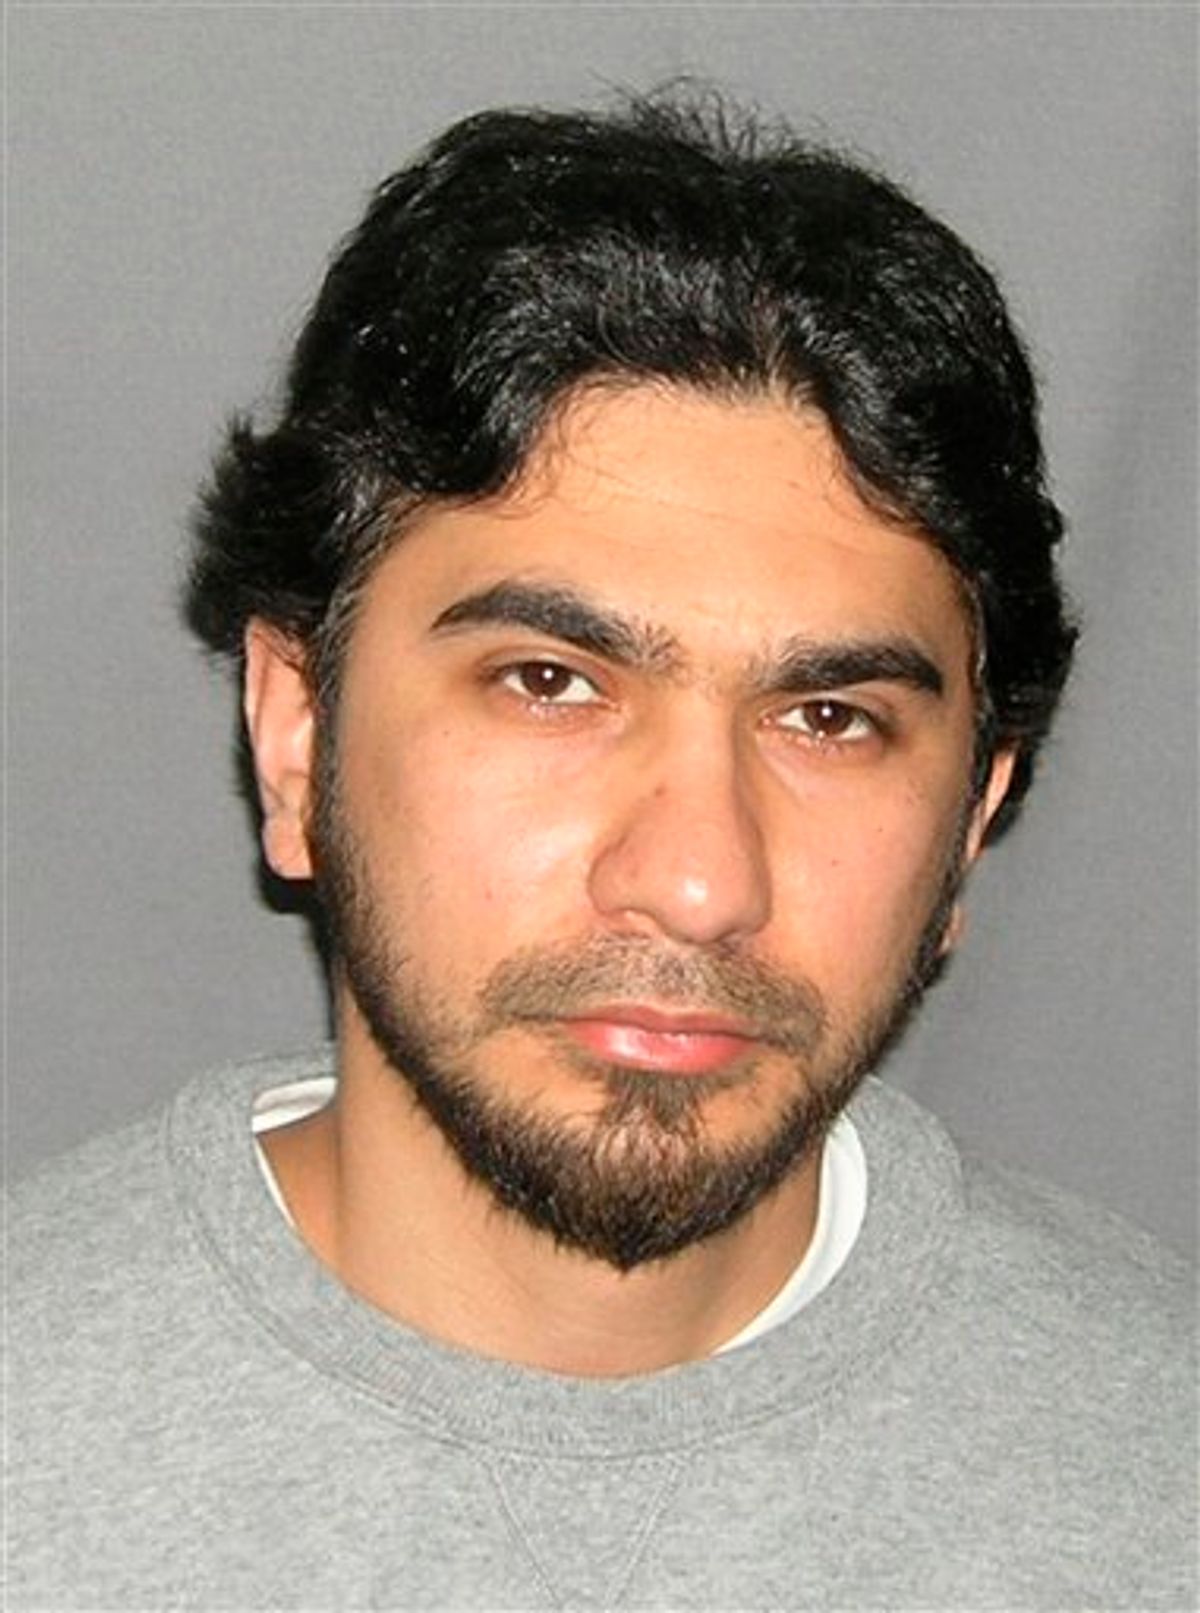 FILE - This undated file photo originally released by the U.S. Marshal's Service on May 19, 2010, shows Faisal Shahzad. A dramatic videotape of the FBI-staged test blast has become a key piece of evidence against Shahzad, who faces a mandatory life prison term at his sentencing Tuesday, Oct. 5, 2010. (AP Photo/U.S. Marshals Service, File) (AP)